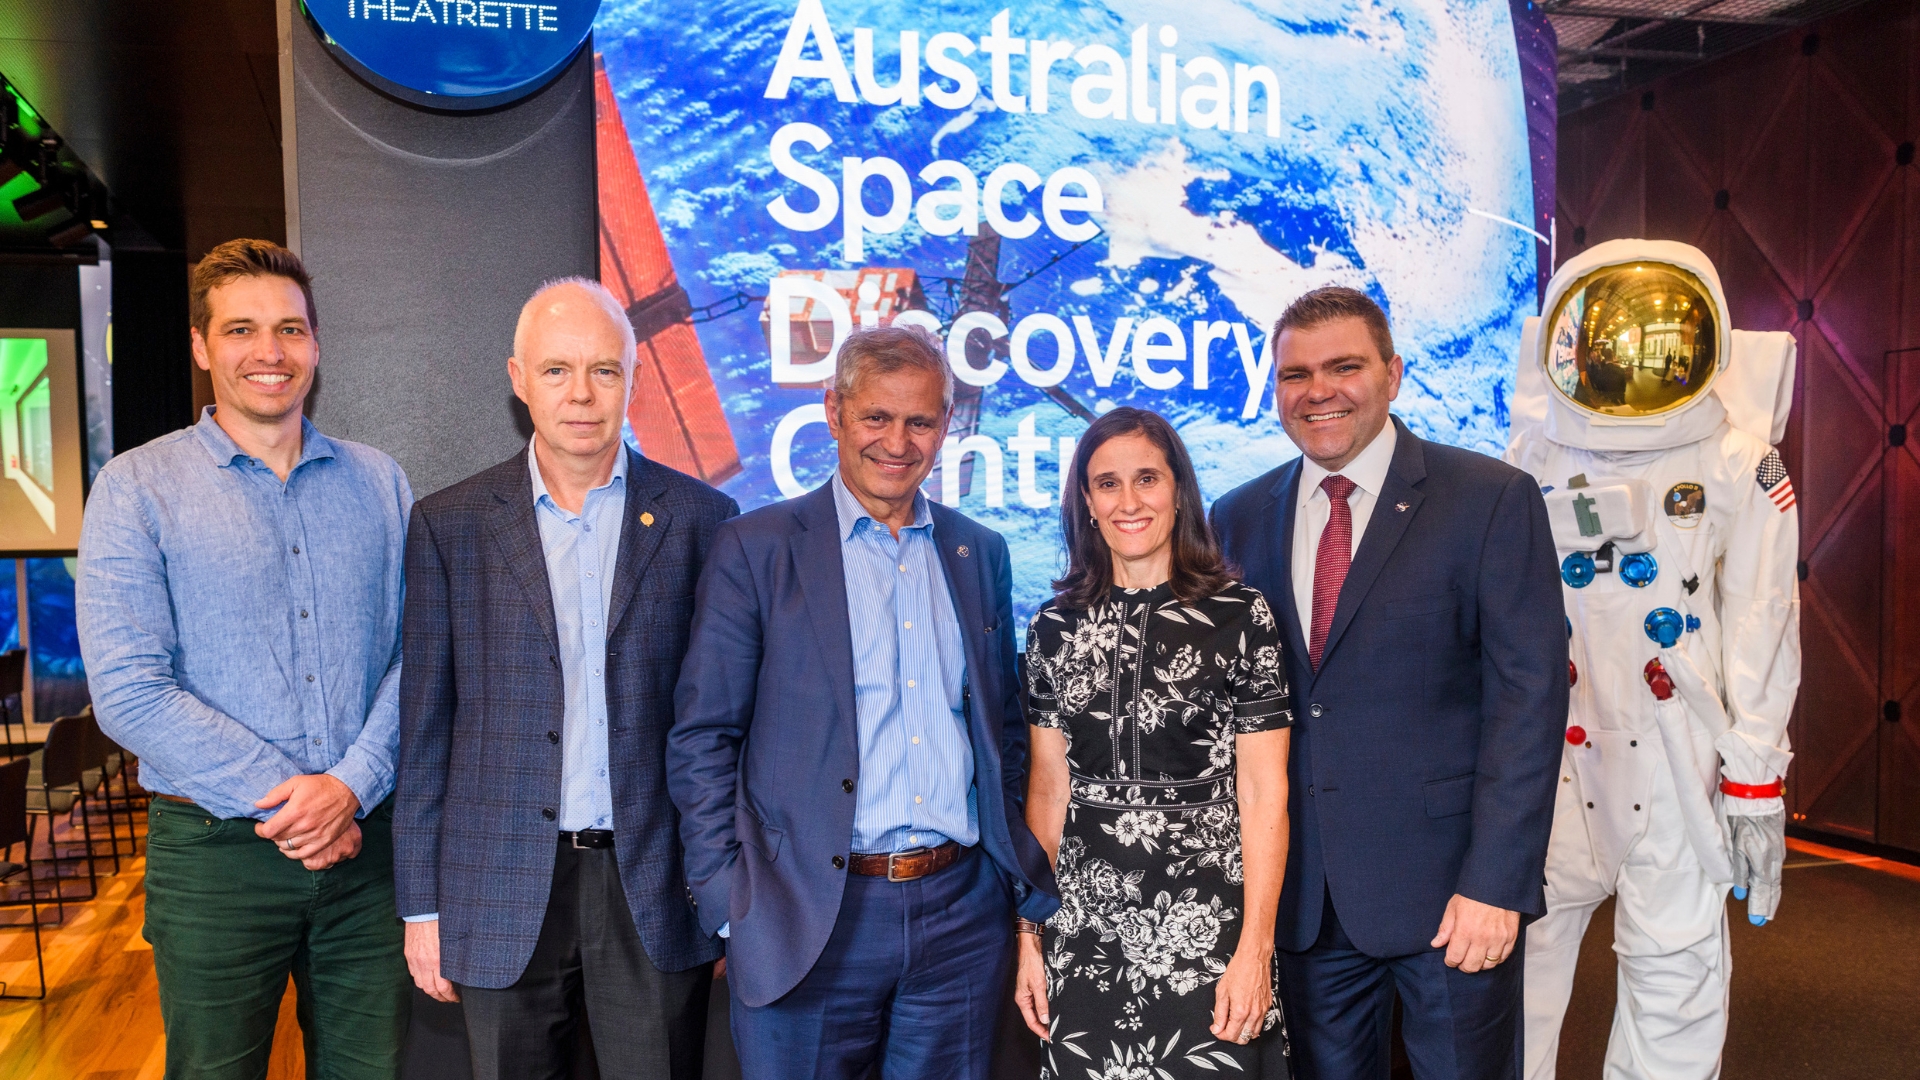 Dr Carl Seubert, Chief Research Officer, SmartSat CRC; Dr Mark Rice, founder, Safety in Space; Professor Andy Koronios, CEO and Managing Director, SmartSat CRC, Dr Lisa Mazzuca, Mission Manager, NASA Search and Rescue; Cody Kelly, Deputy for National Affairs, NASA Search and Rescue